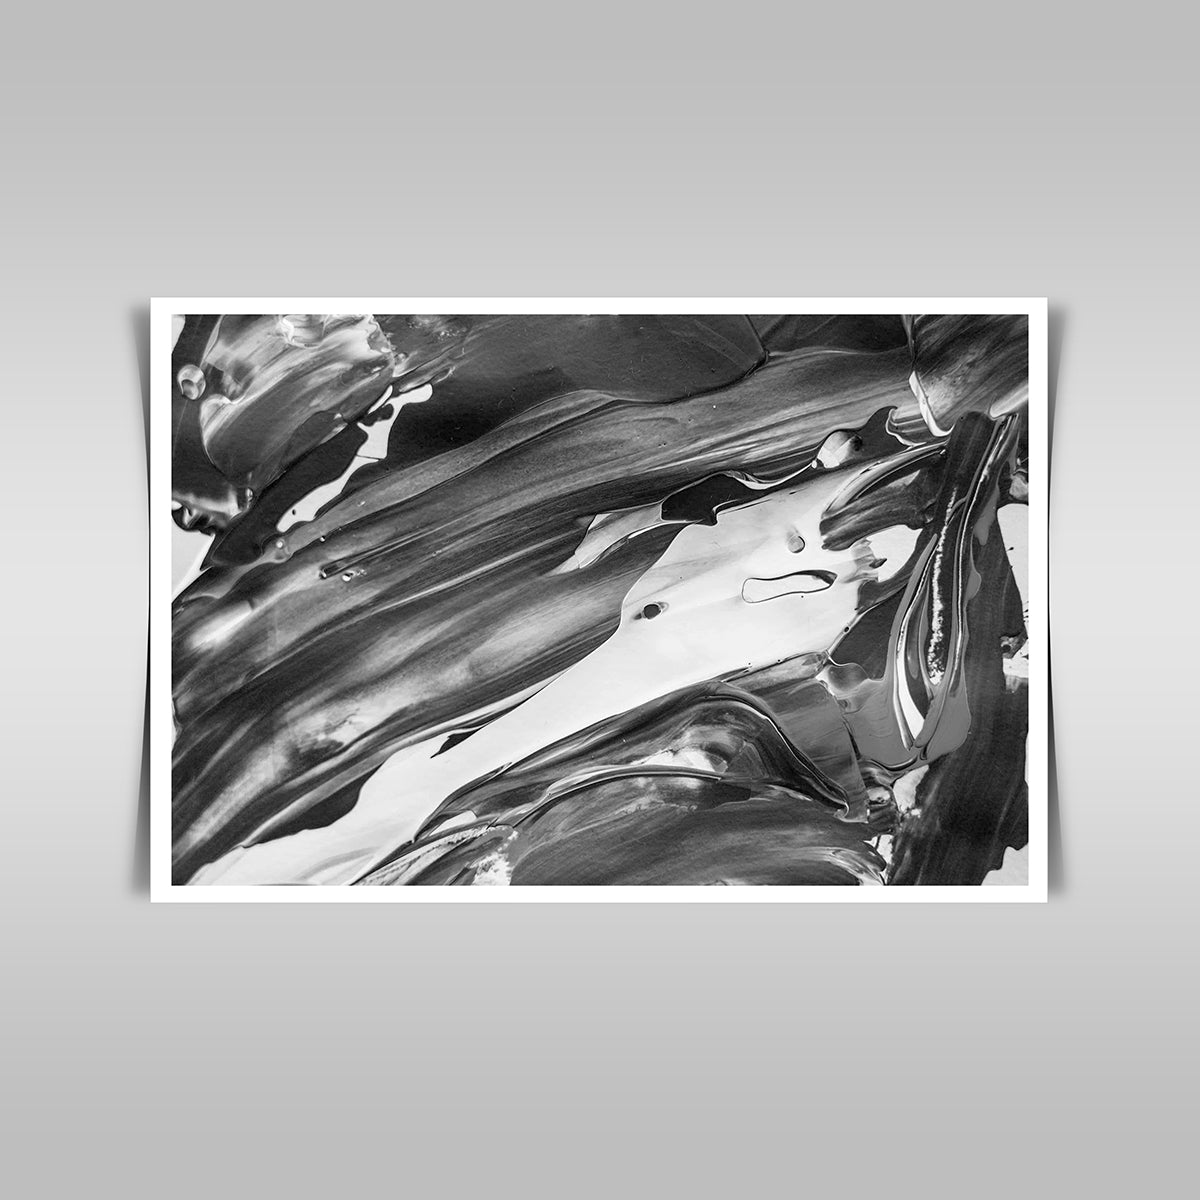 "Abstract Black and White Ink Painting: Hand-Painted Watercolor on Grunge Paper."